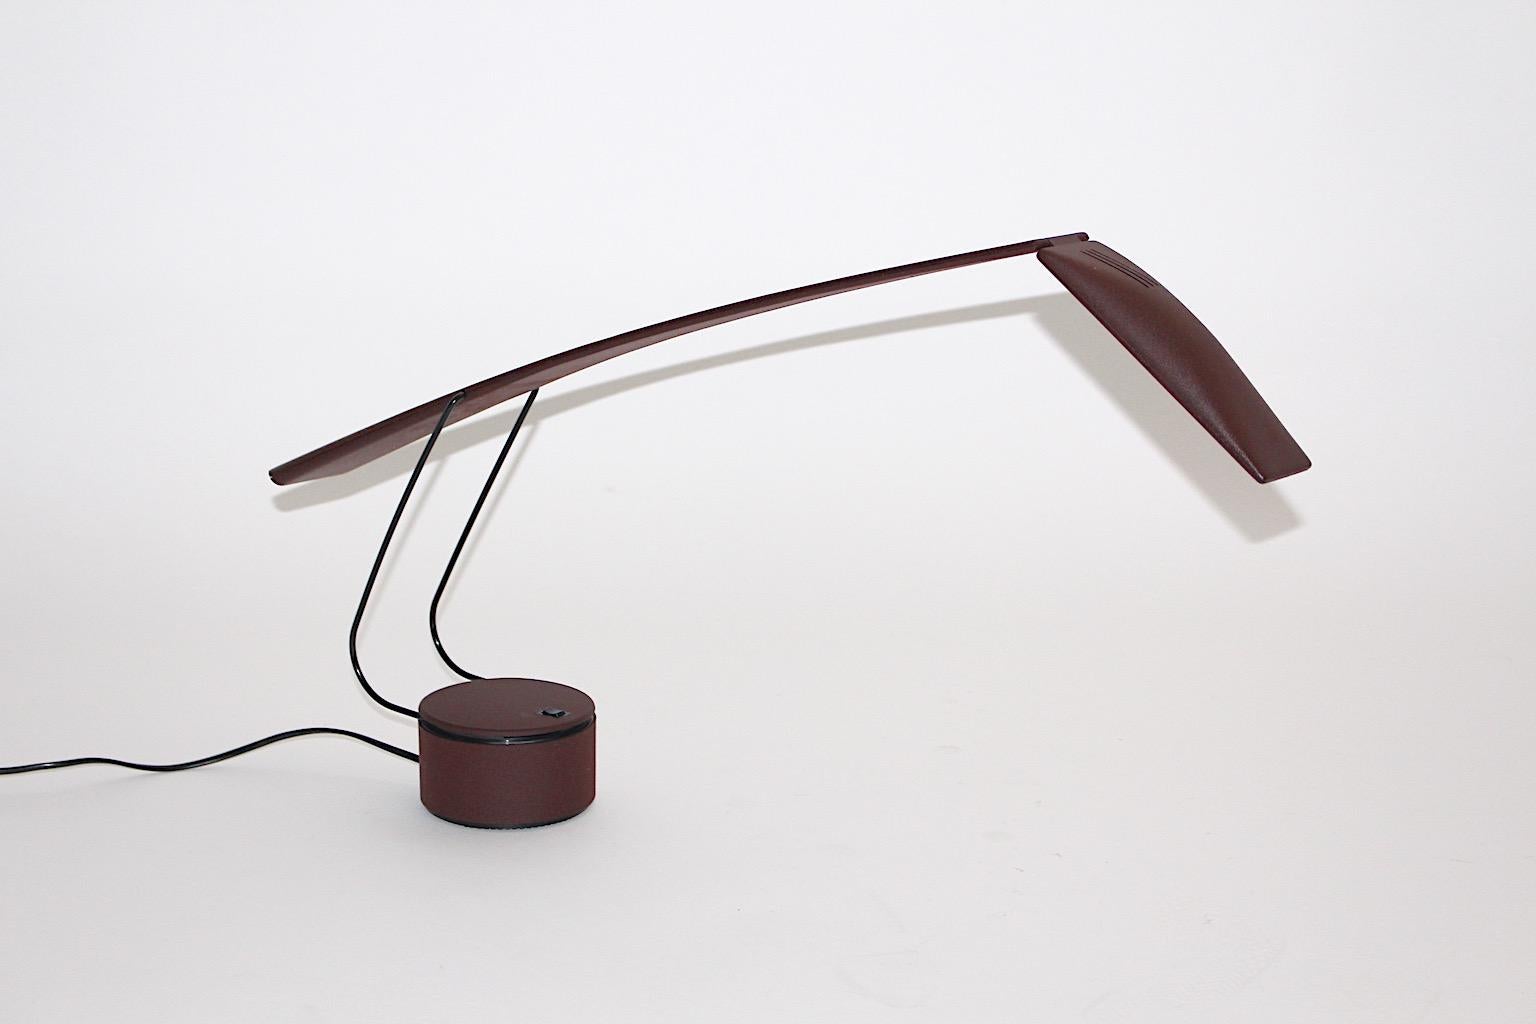 A Mario Barbaglia & Marco Colombo dove vintage desk lamp for Paf Studio 1980s Italy, which was made of brown plastic and metal.
The desk lamp is adjustable from up to down and rotates on its base. One halogen bulb and an on/off switch. So it allows